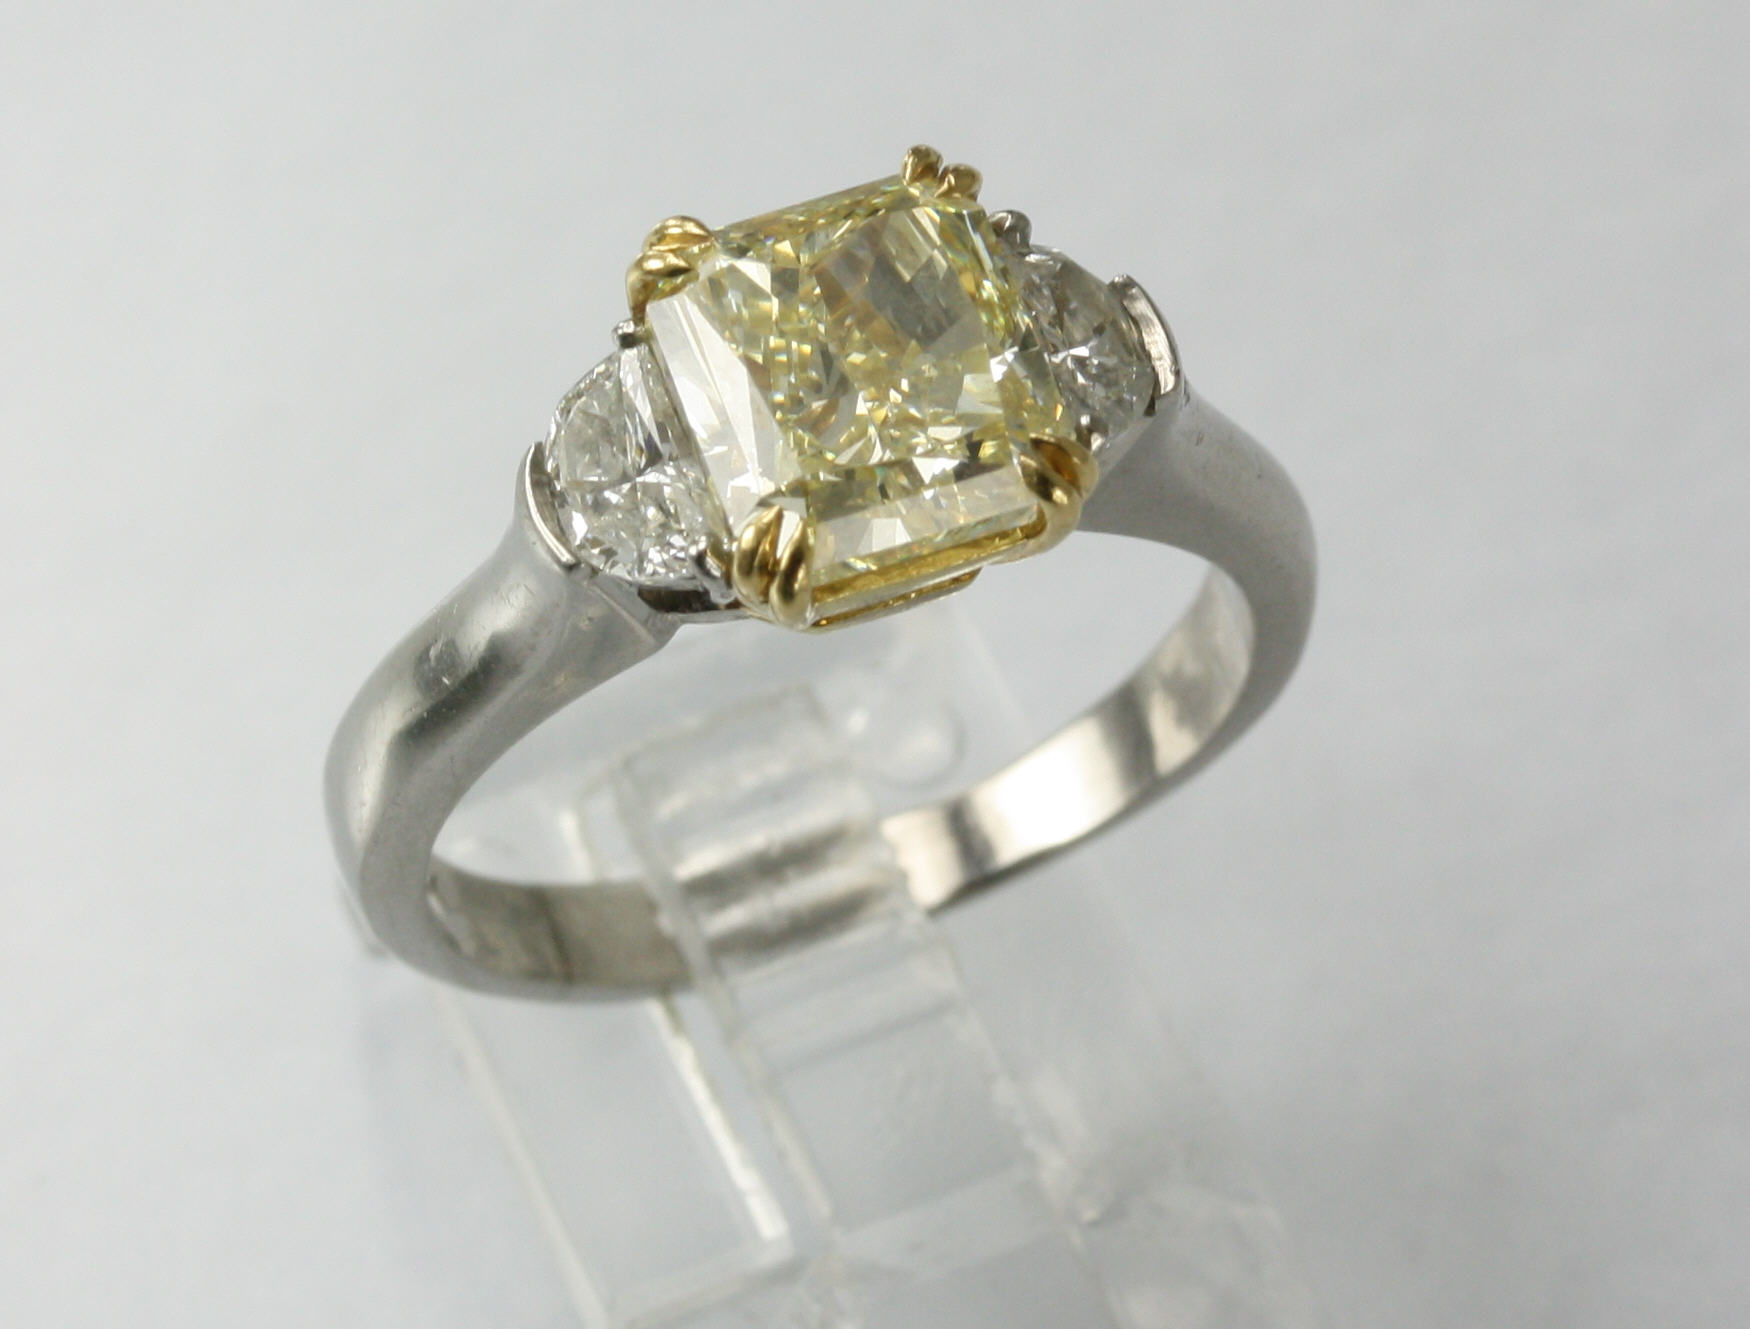 Estate Platinum Diamond Ring Having 1 Radiant Cut Diamond Mounted In An 18 Karat yellow gold Center Weighing 3.02 Carat  VS1-Natural Fancy Light Yellow With 1 Half Moon Diamond Prong Set On Either Side With A Total Weight Of .60 Carat VS2-G